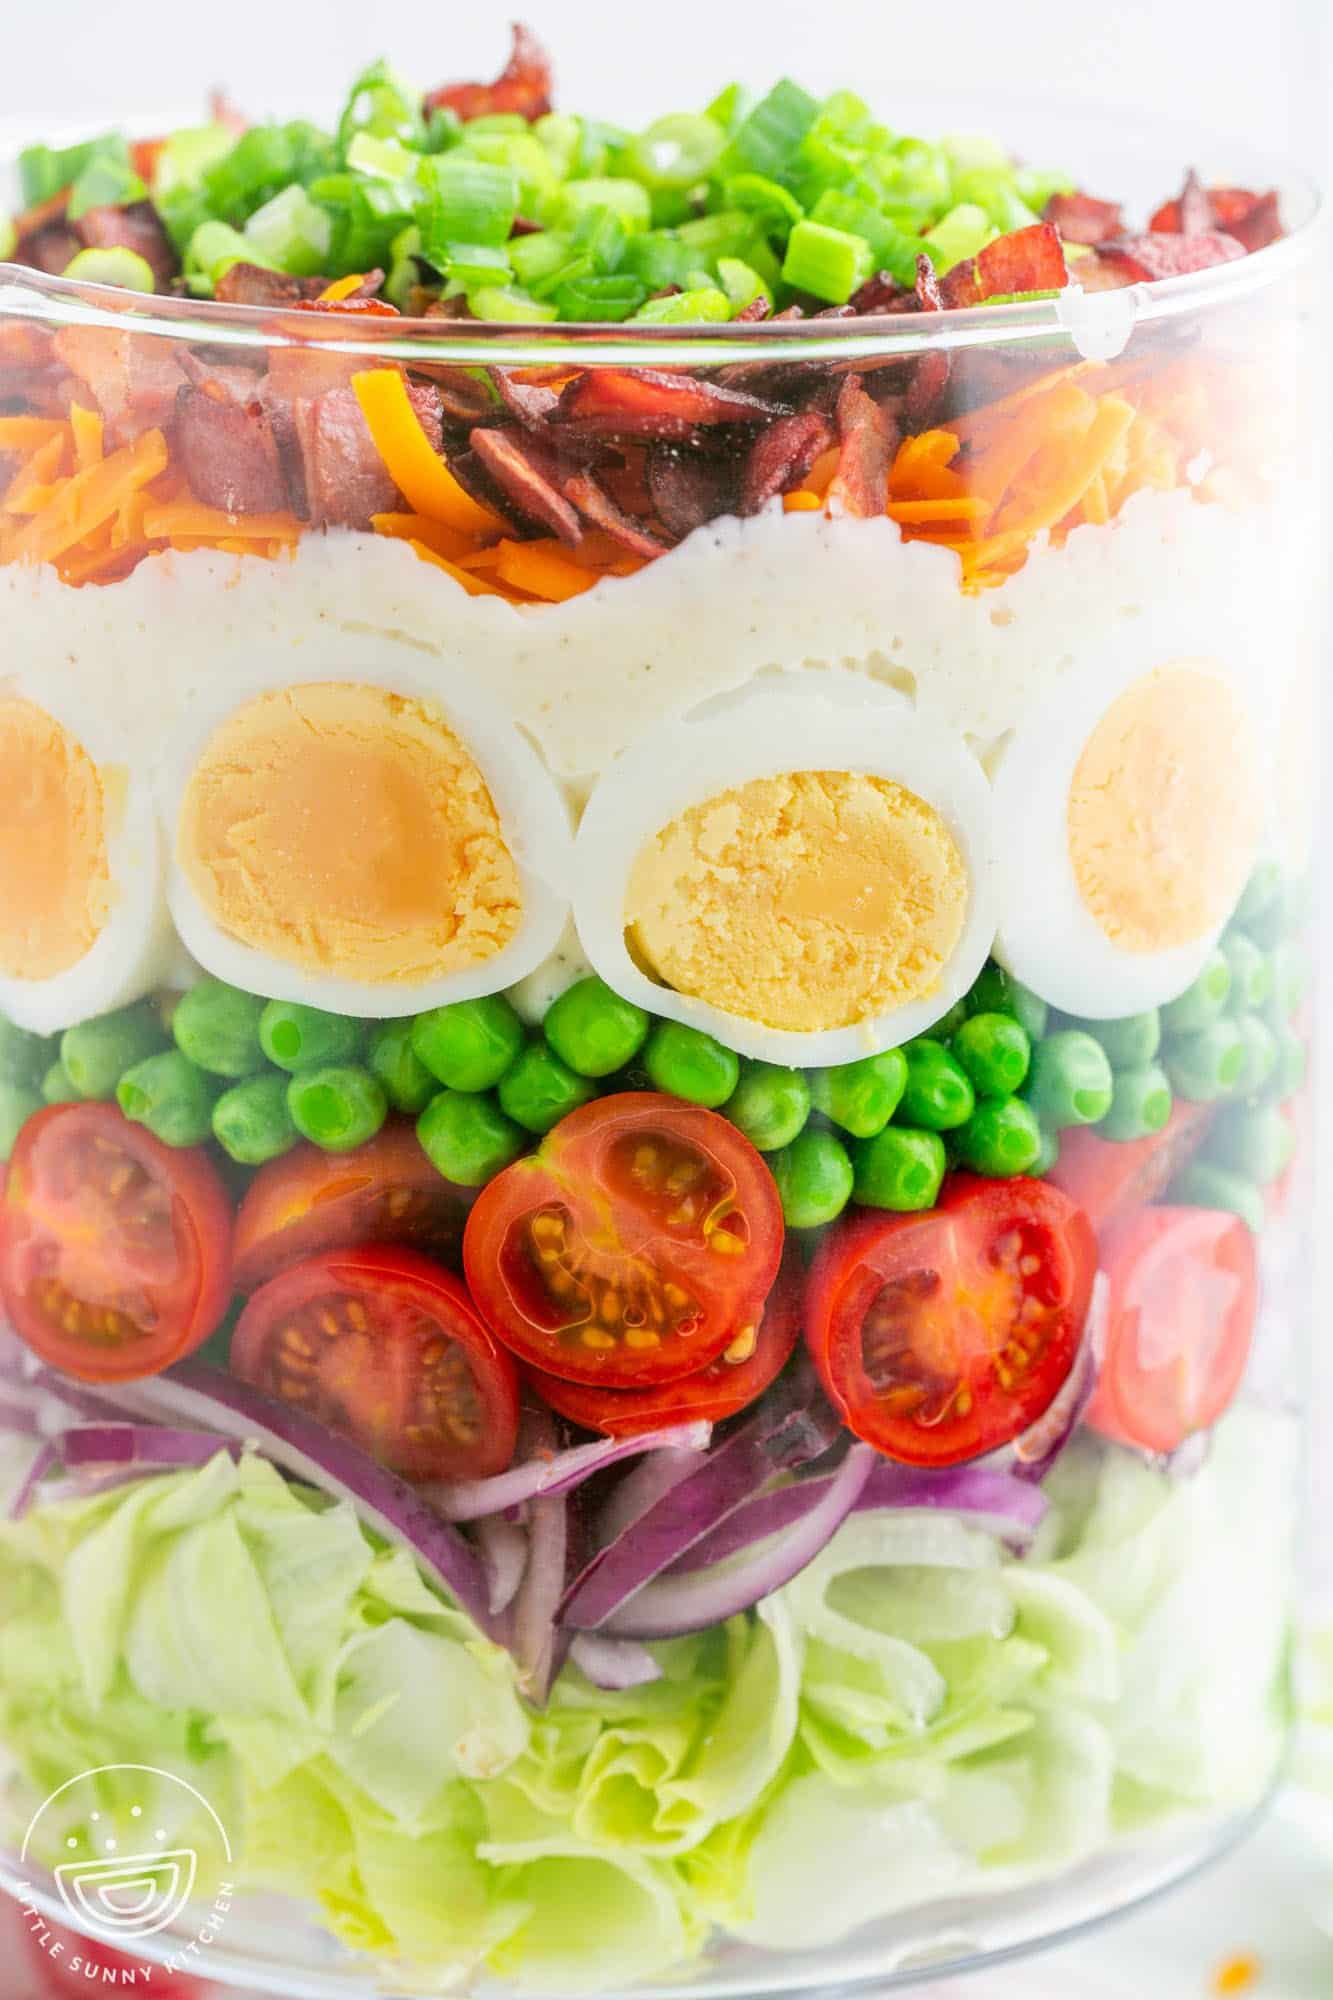 Closeup view of a layered salad in a clear class cylinder dish.